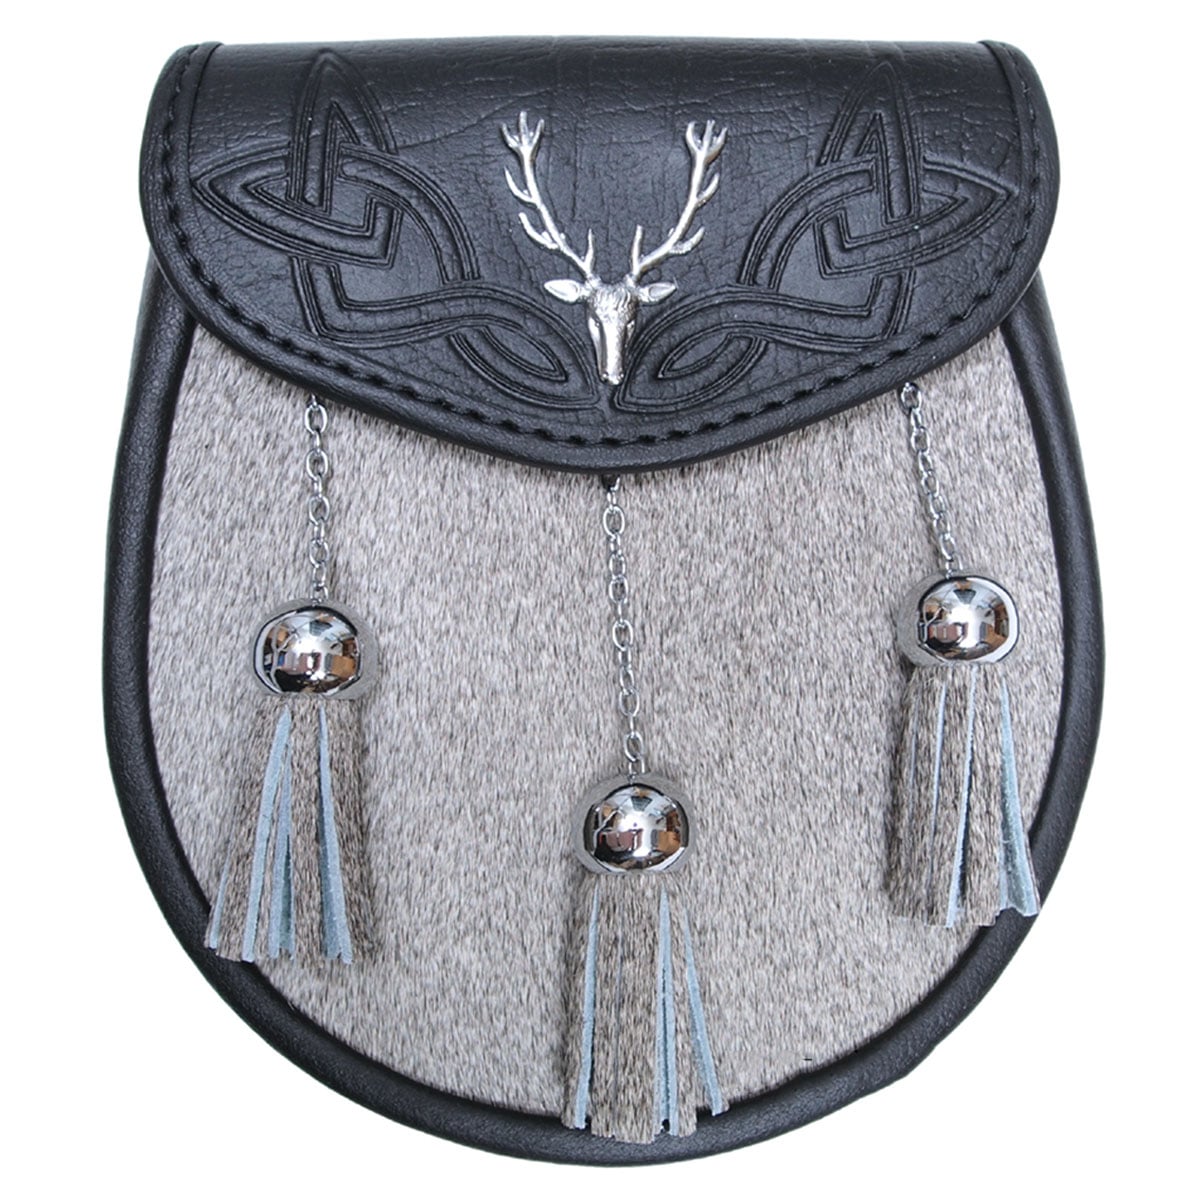 A premium black and grey kilt with studded targe and bovine accents, embellished with tassels and featuring a Stag Celtic Embossed Grey Fur Sporran motif.